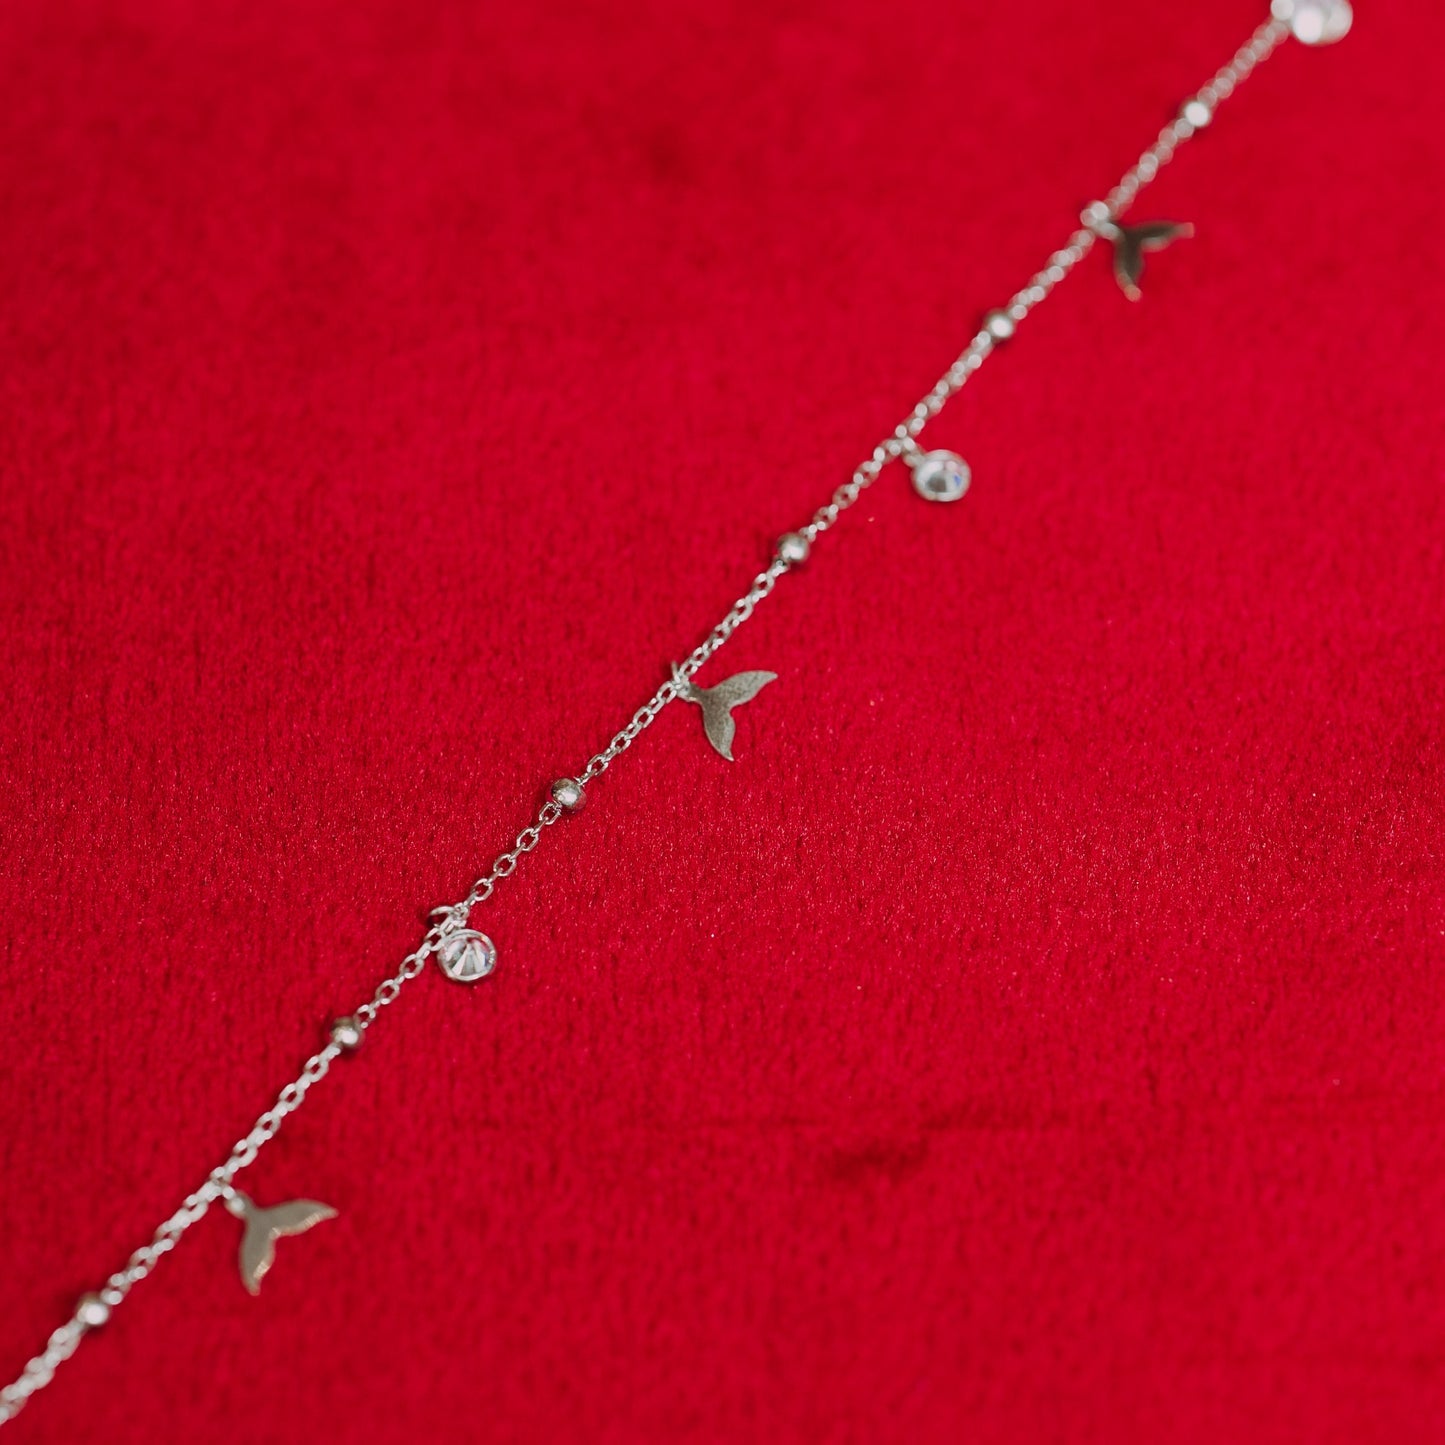 Ocean- Inspired Silver Anklet with Dolphin Fins